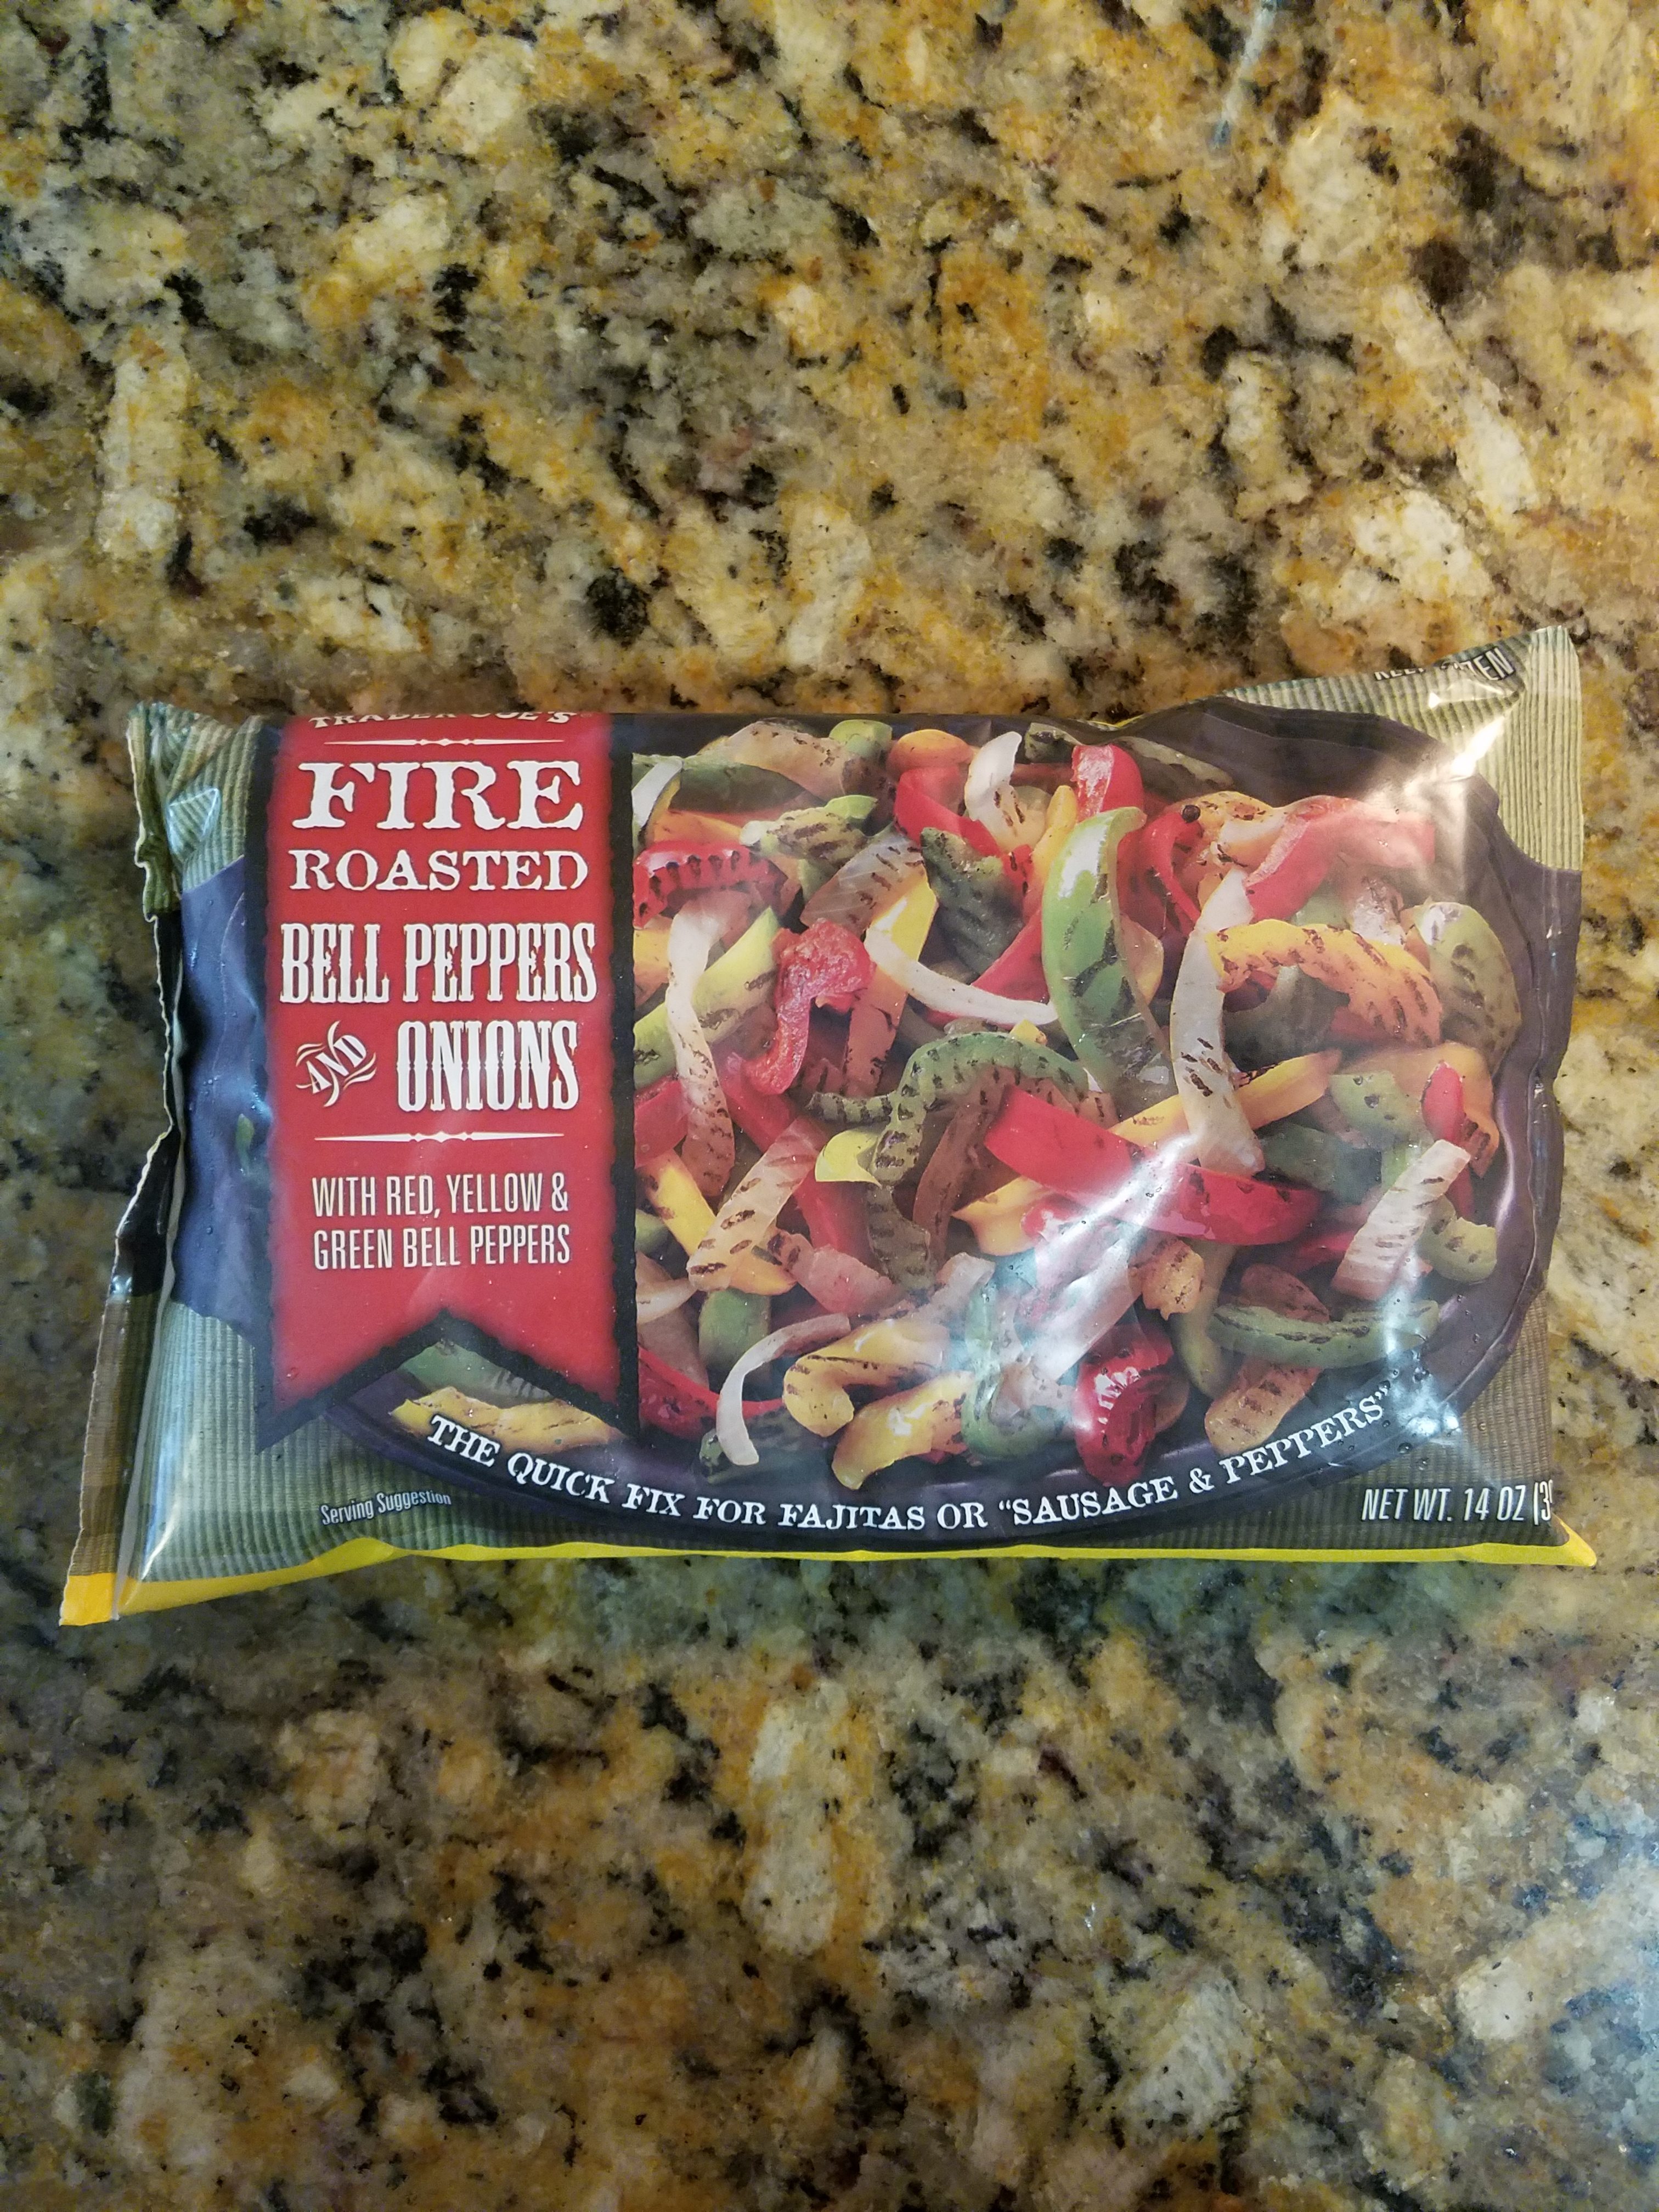 Peppers, Trader Joe's Fire Roasted Bell Peppers and Onions